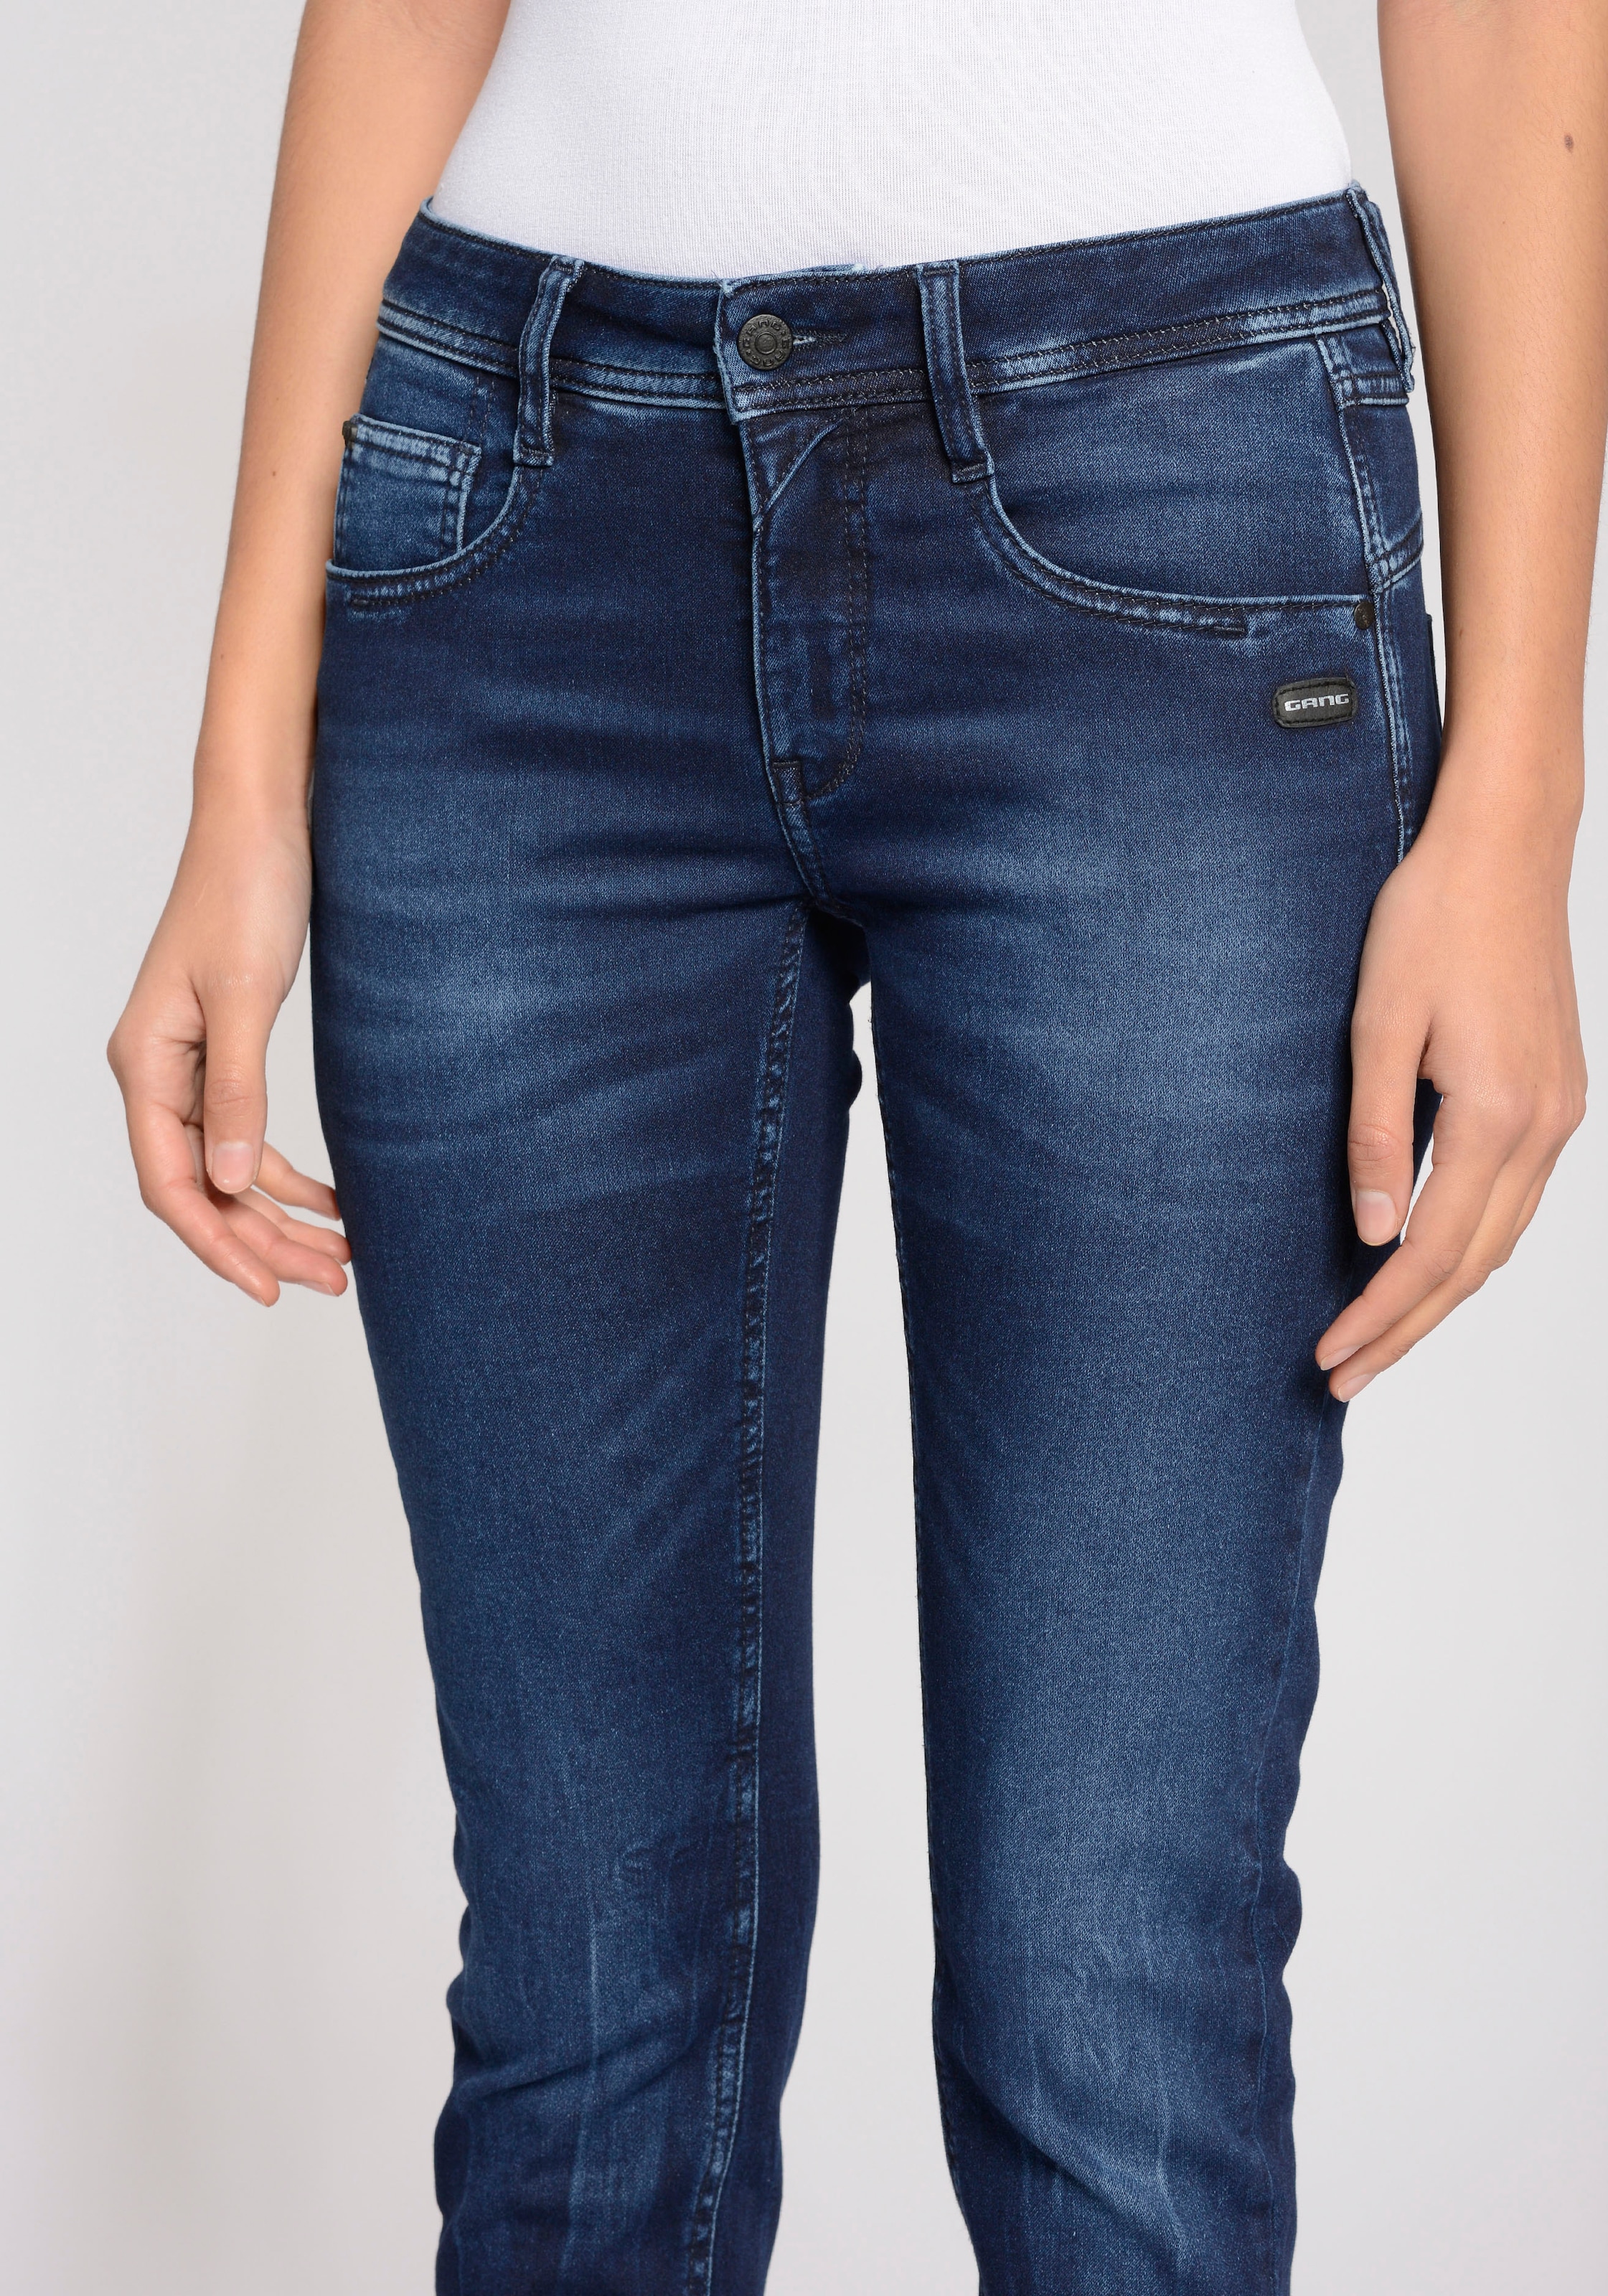 GANG Relax-fit-Jeans »94Amelie bei kaufen OTTO Cropped«